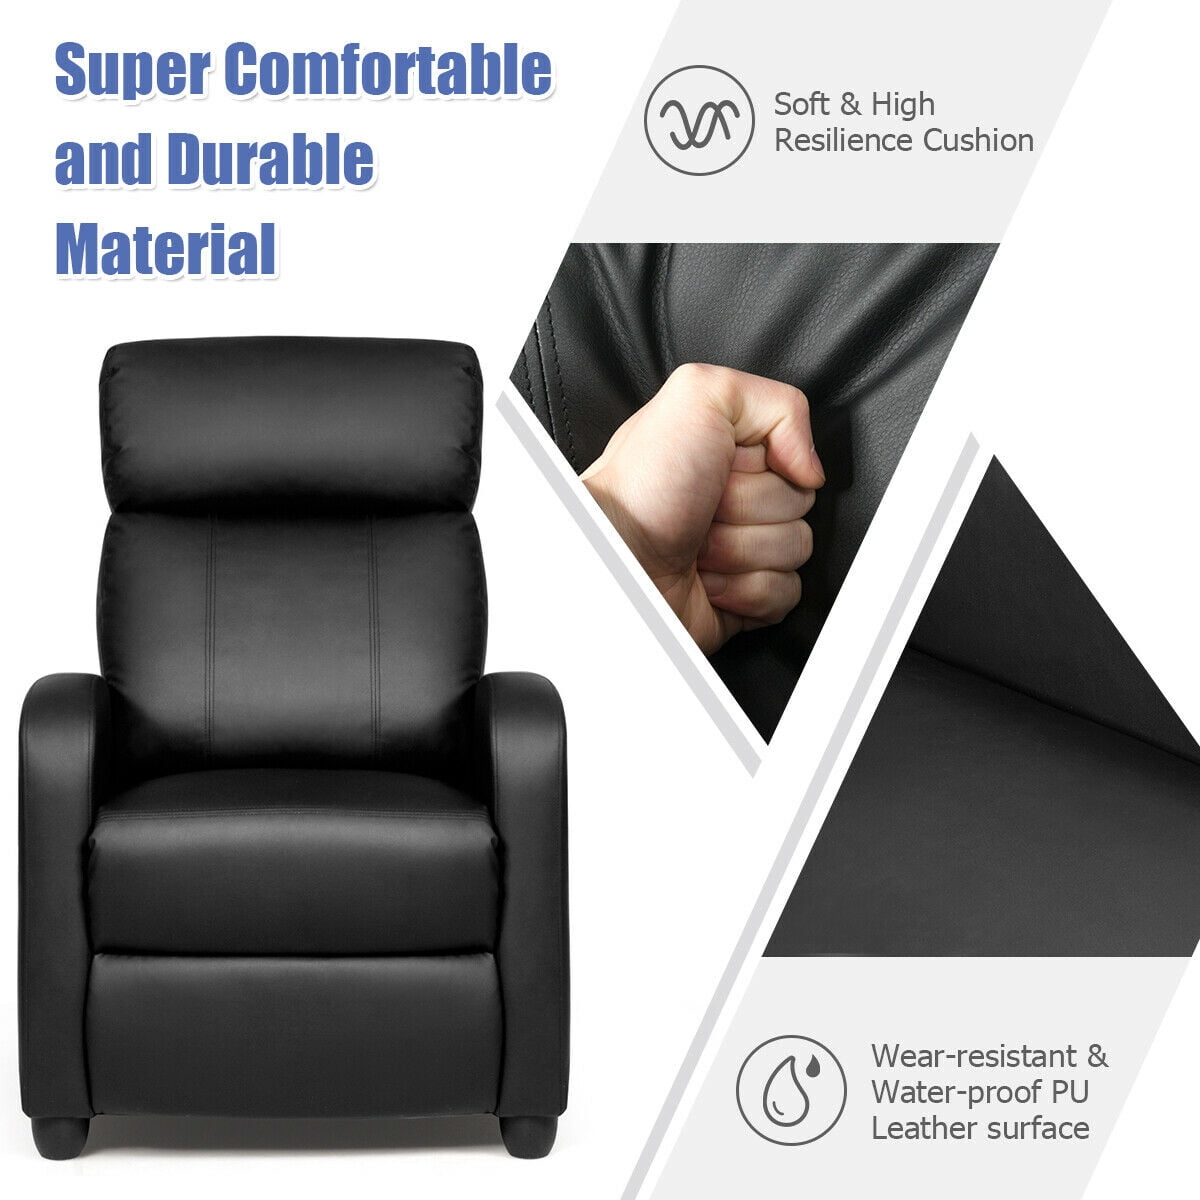 Details about   Classic Recliner Chair Sofa Armchair PU Leather Padded Seat w/Footrest Ottoman 